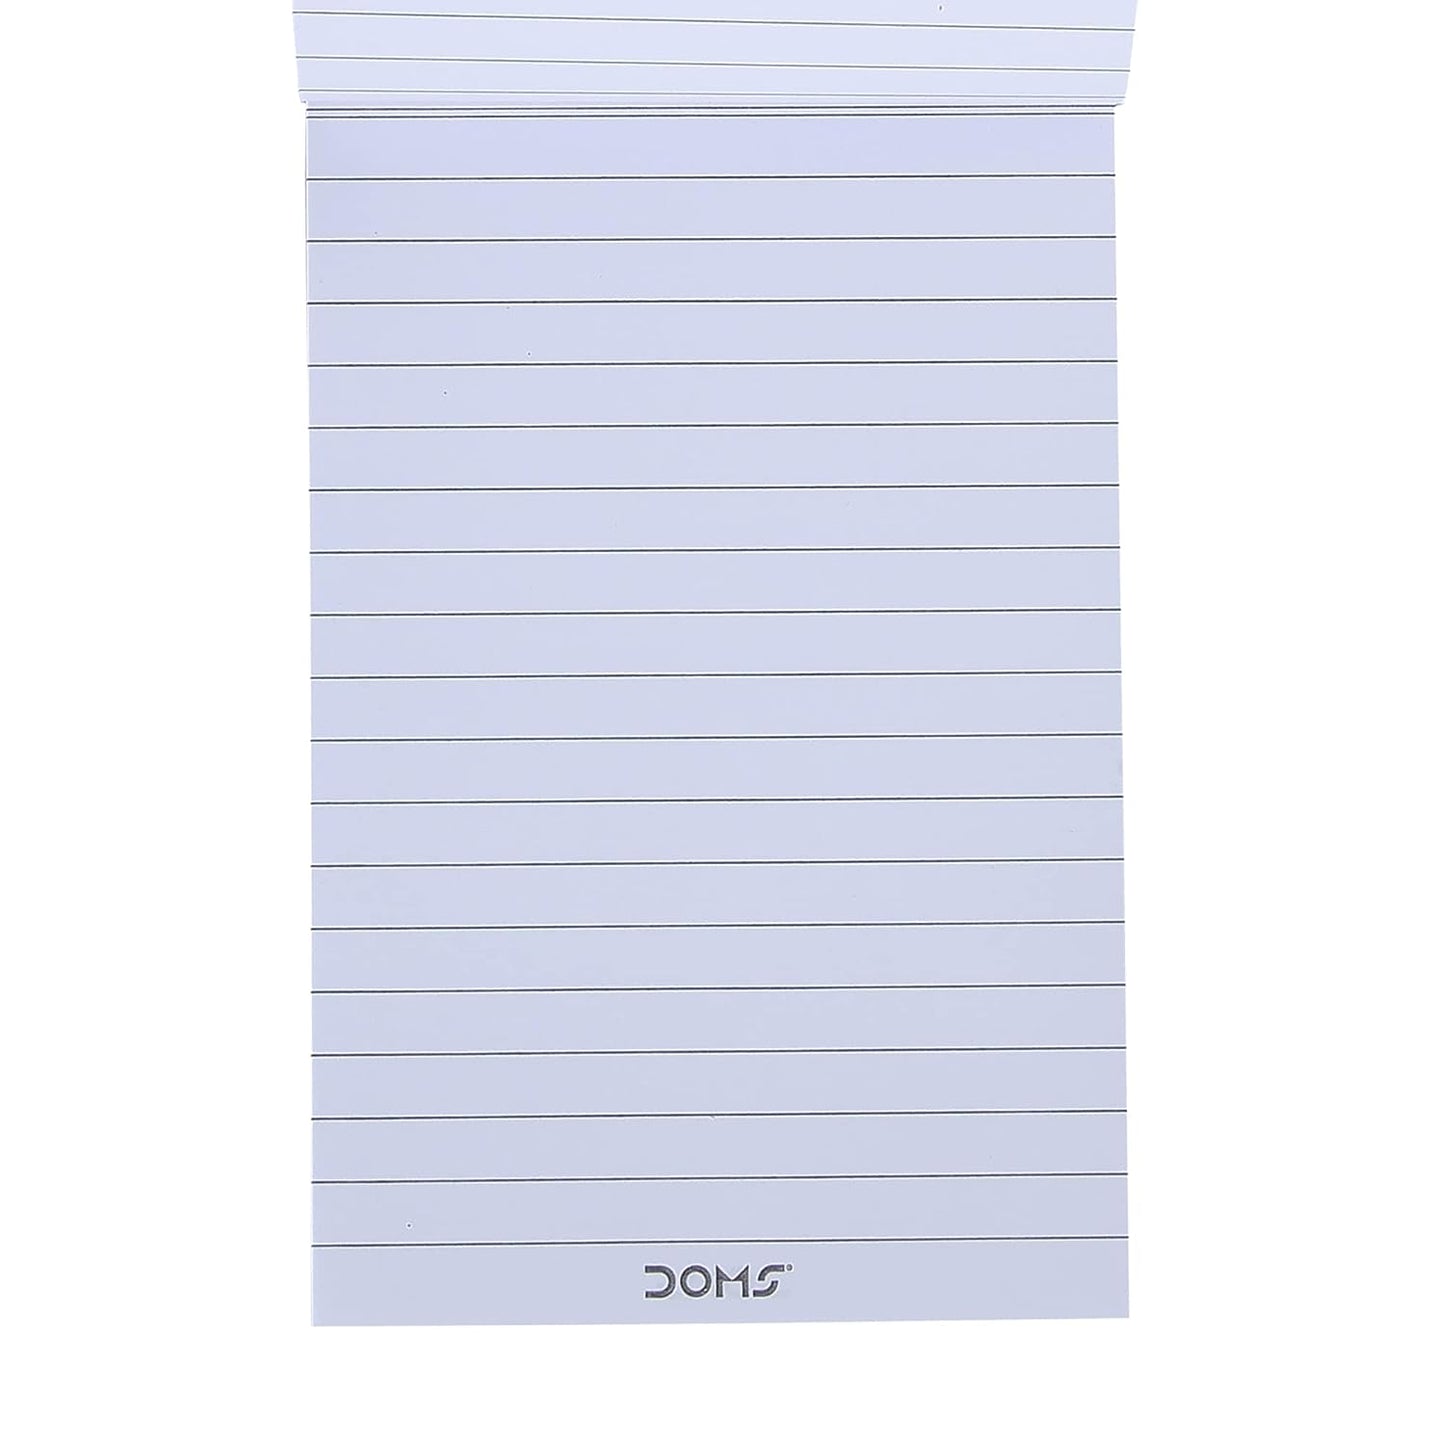 Doms NotePad | 80 Pages | 21 x 14 cm | Pack of 6